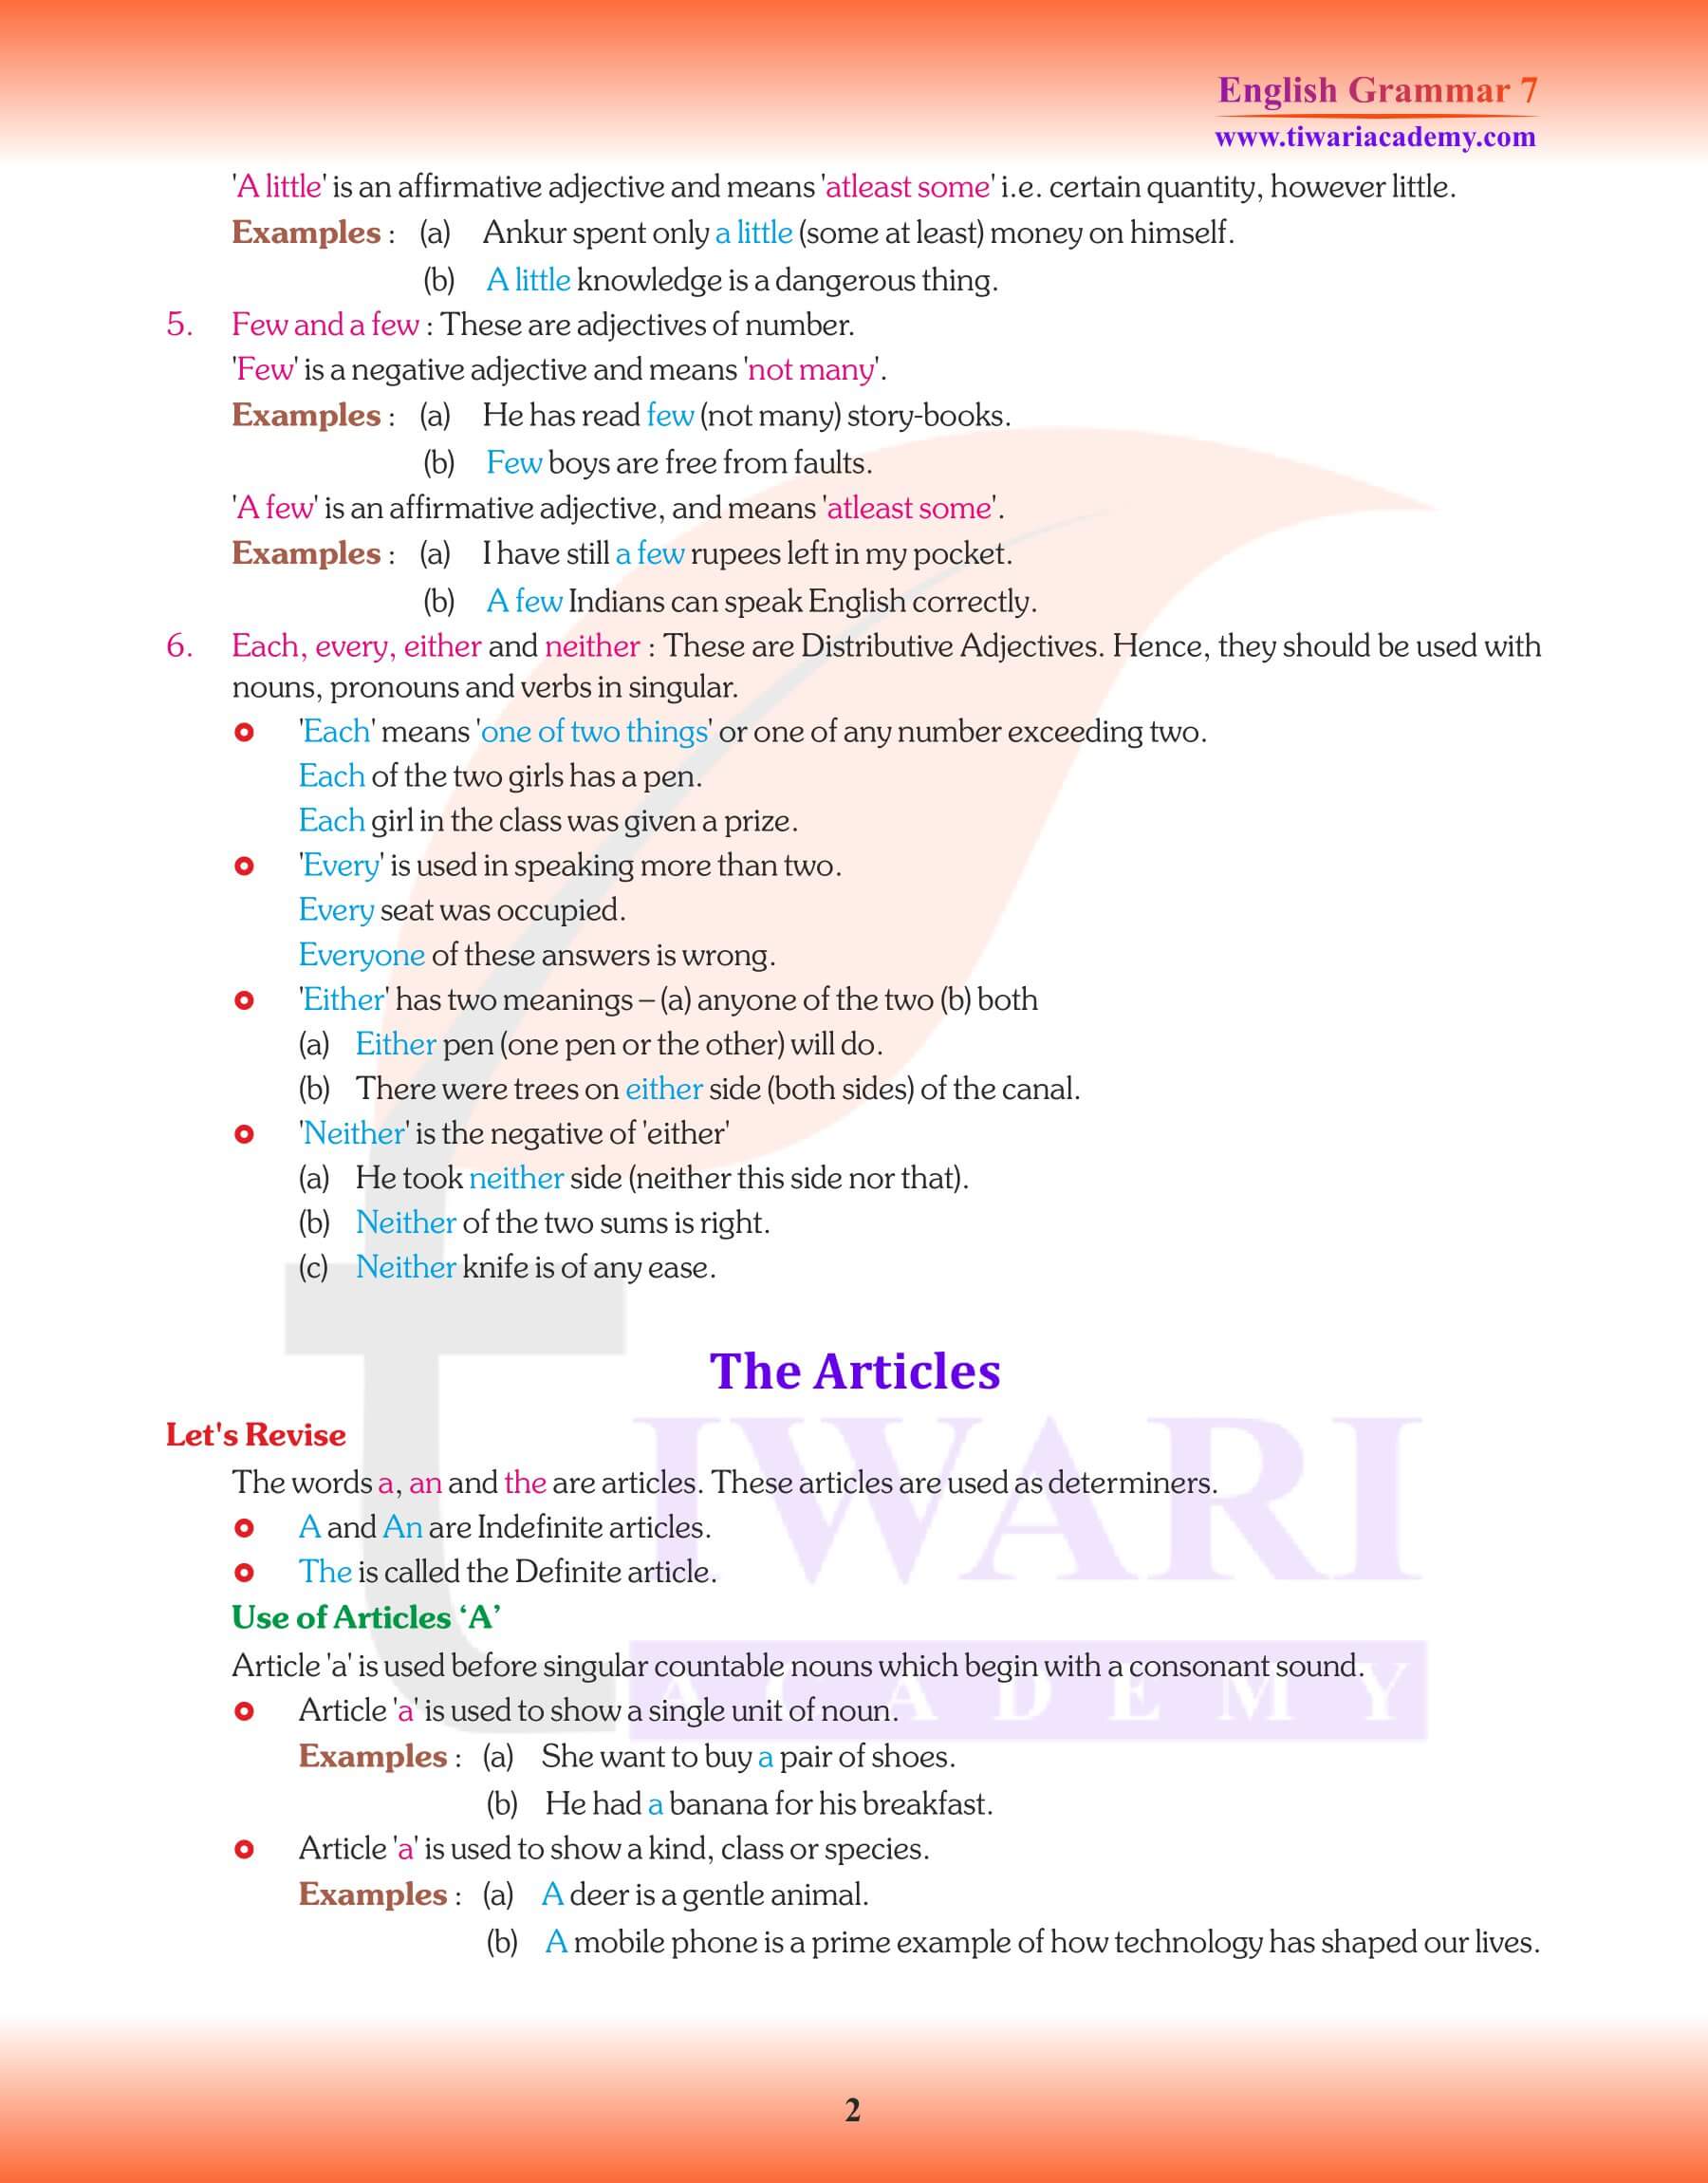 Class 7 English Grammar Chapter 6 Revision notes